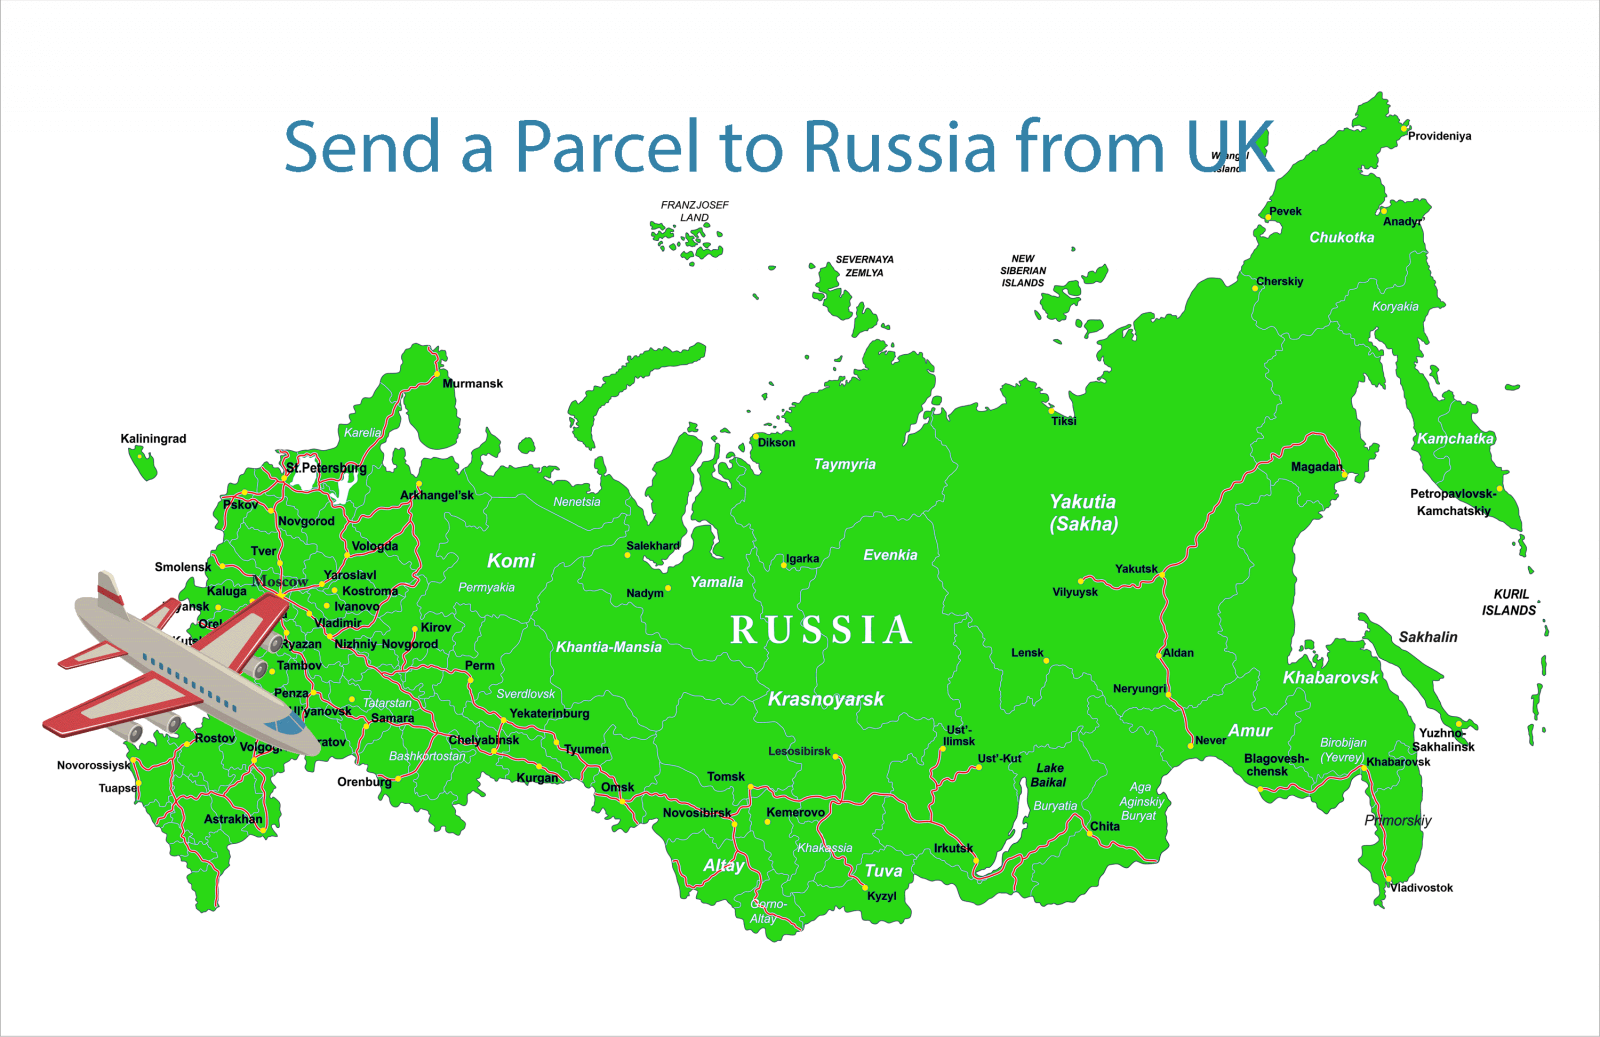 Send a Parcel to Russia from UK